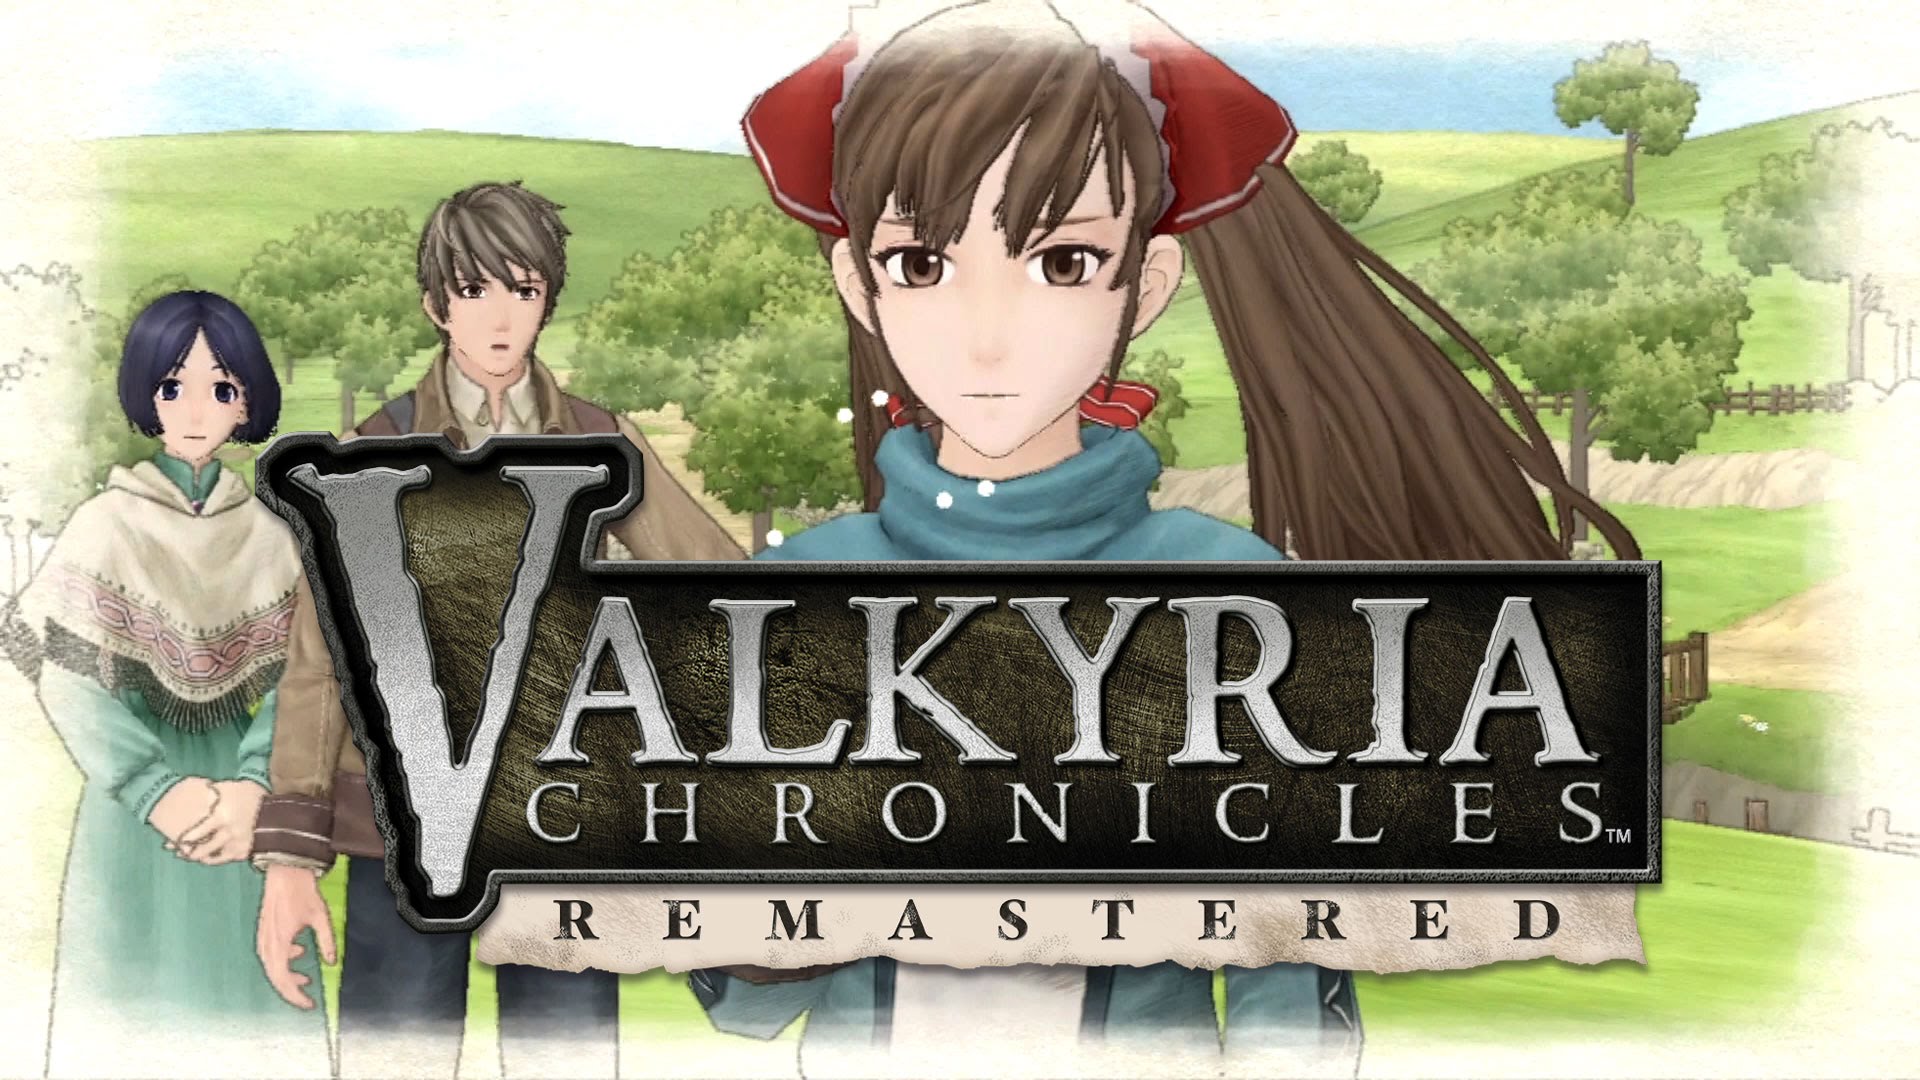 Valkyria Chronicles Remastered | Story Trailer